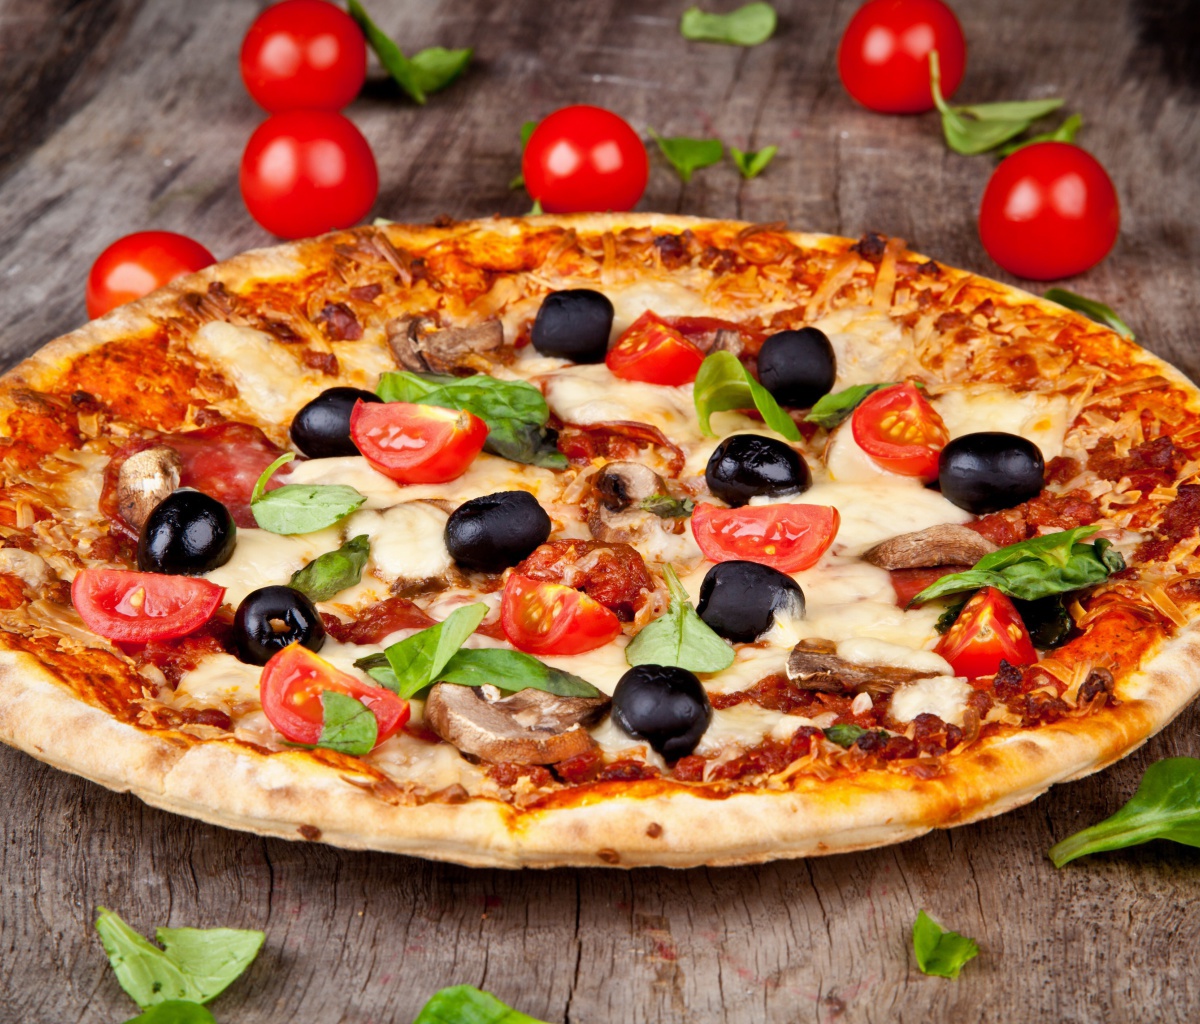 Pizza with tomatoes and olives screenshot #1 1200x1024